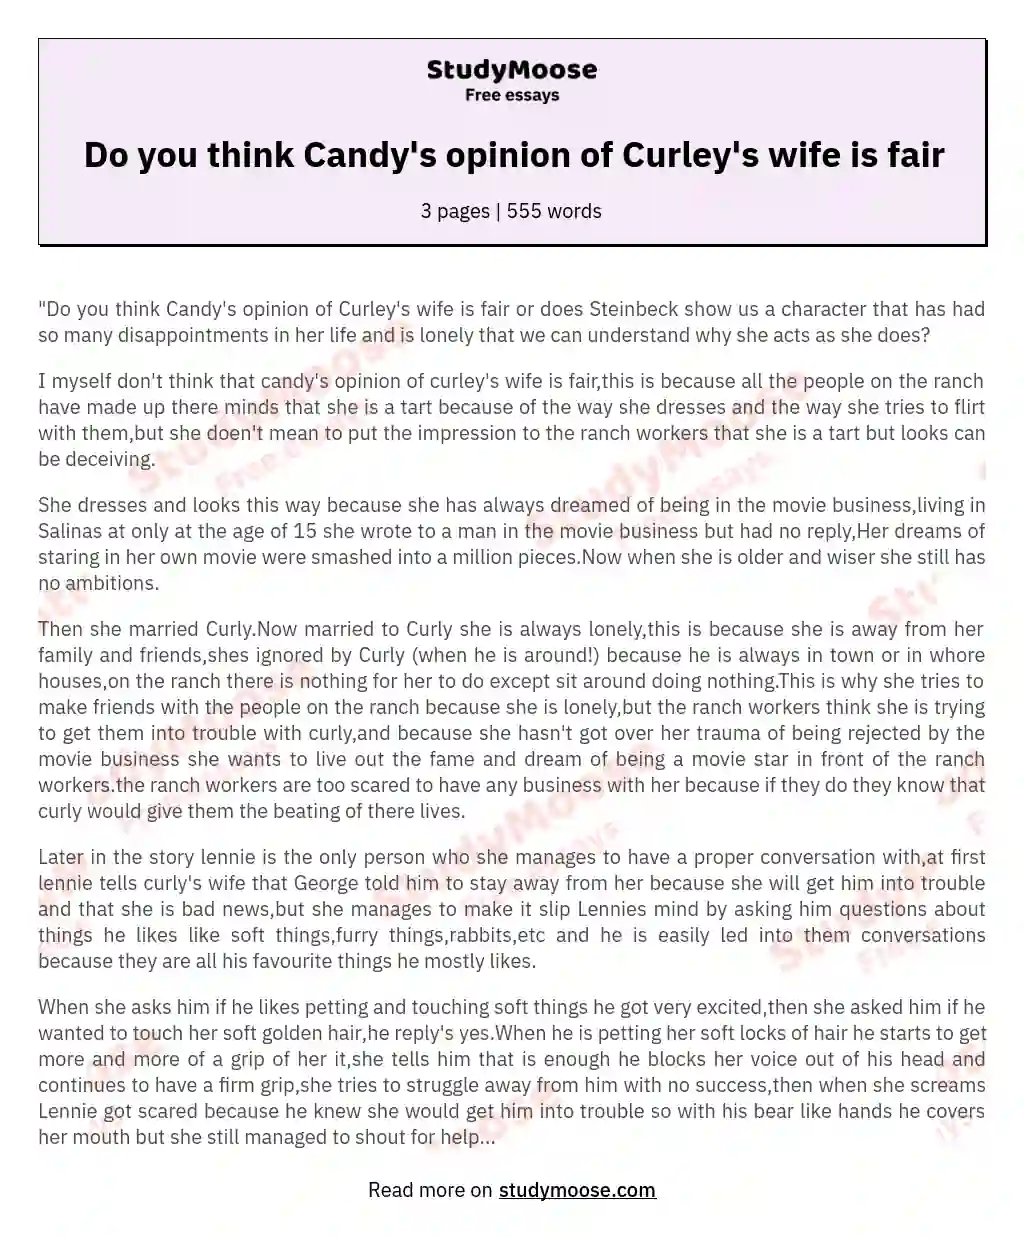 Do you think Candy's opinion of Curley's wife is fair essay